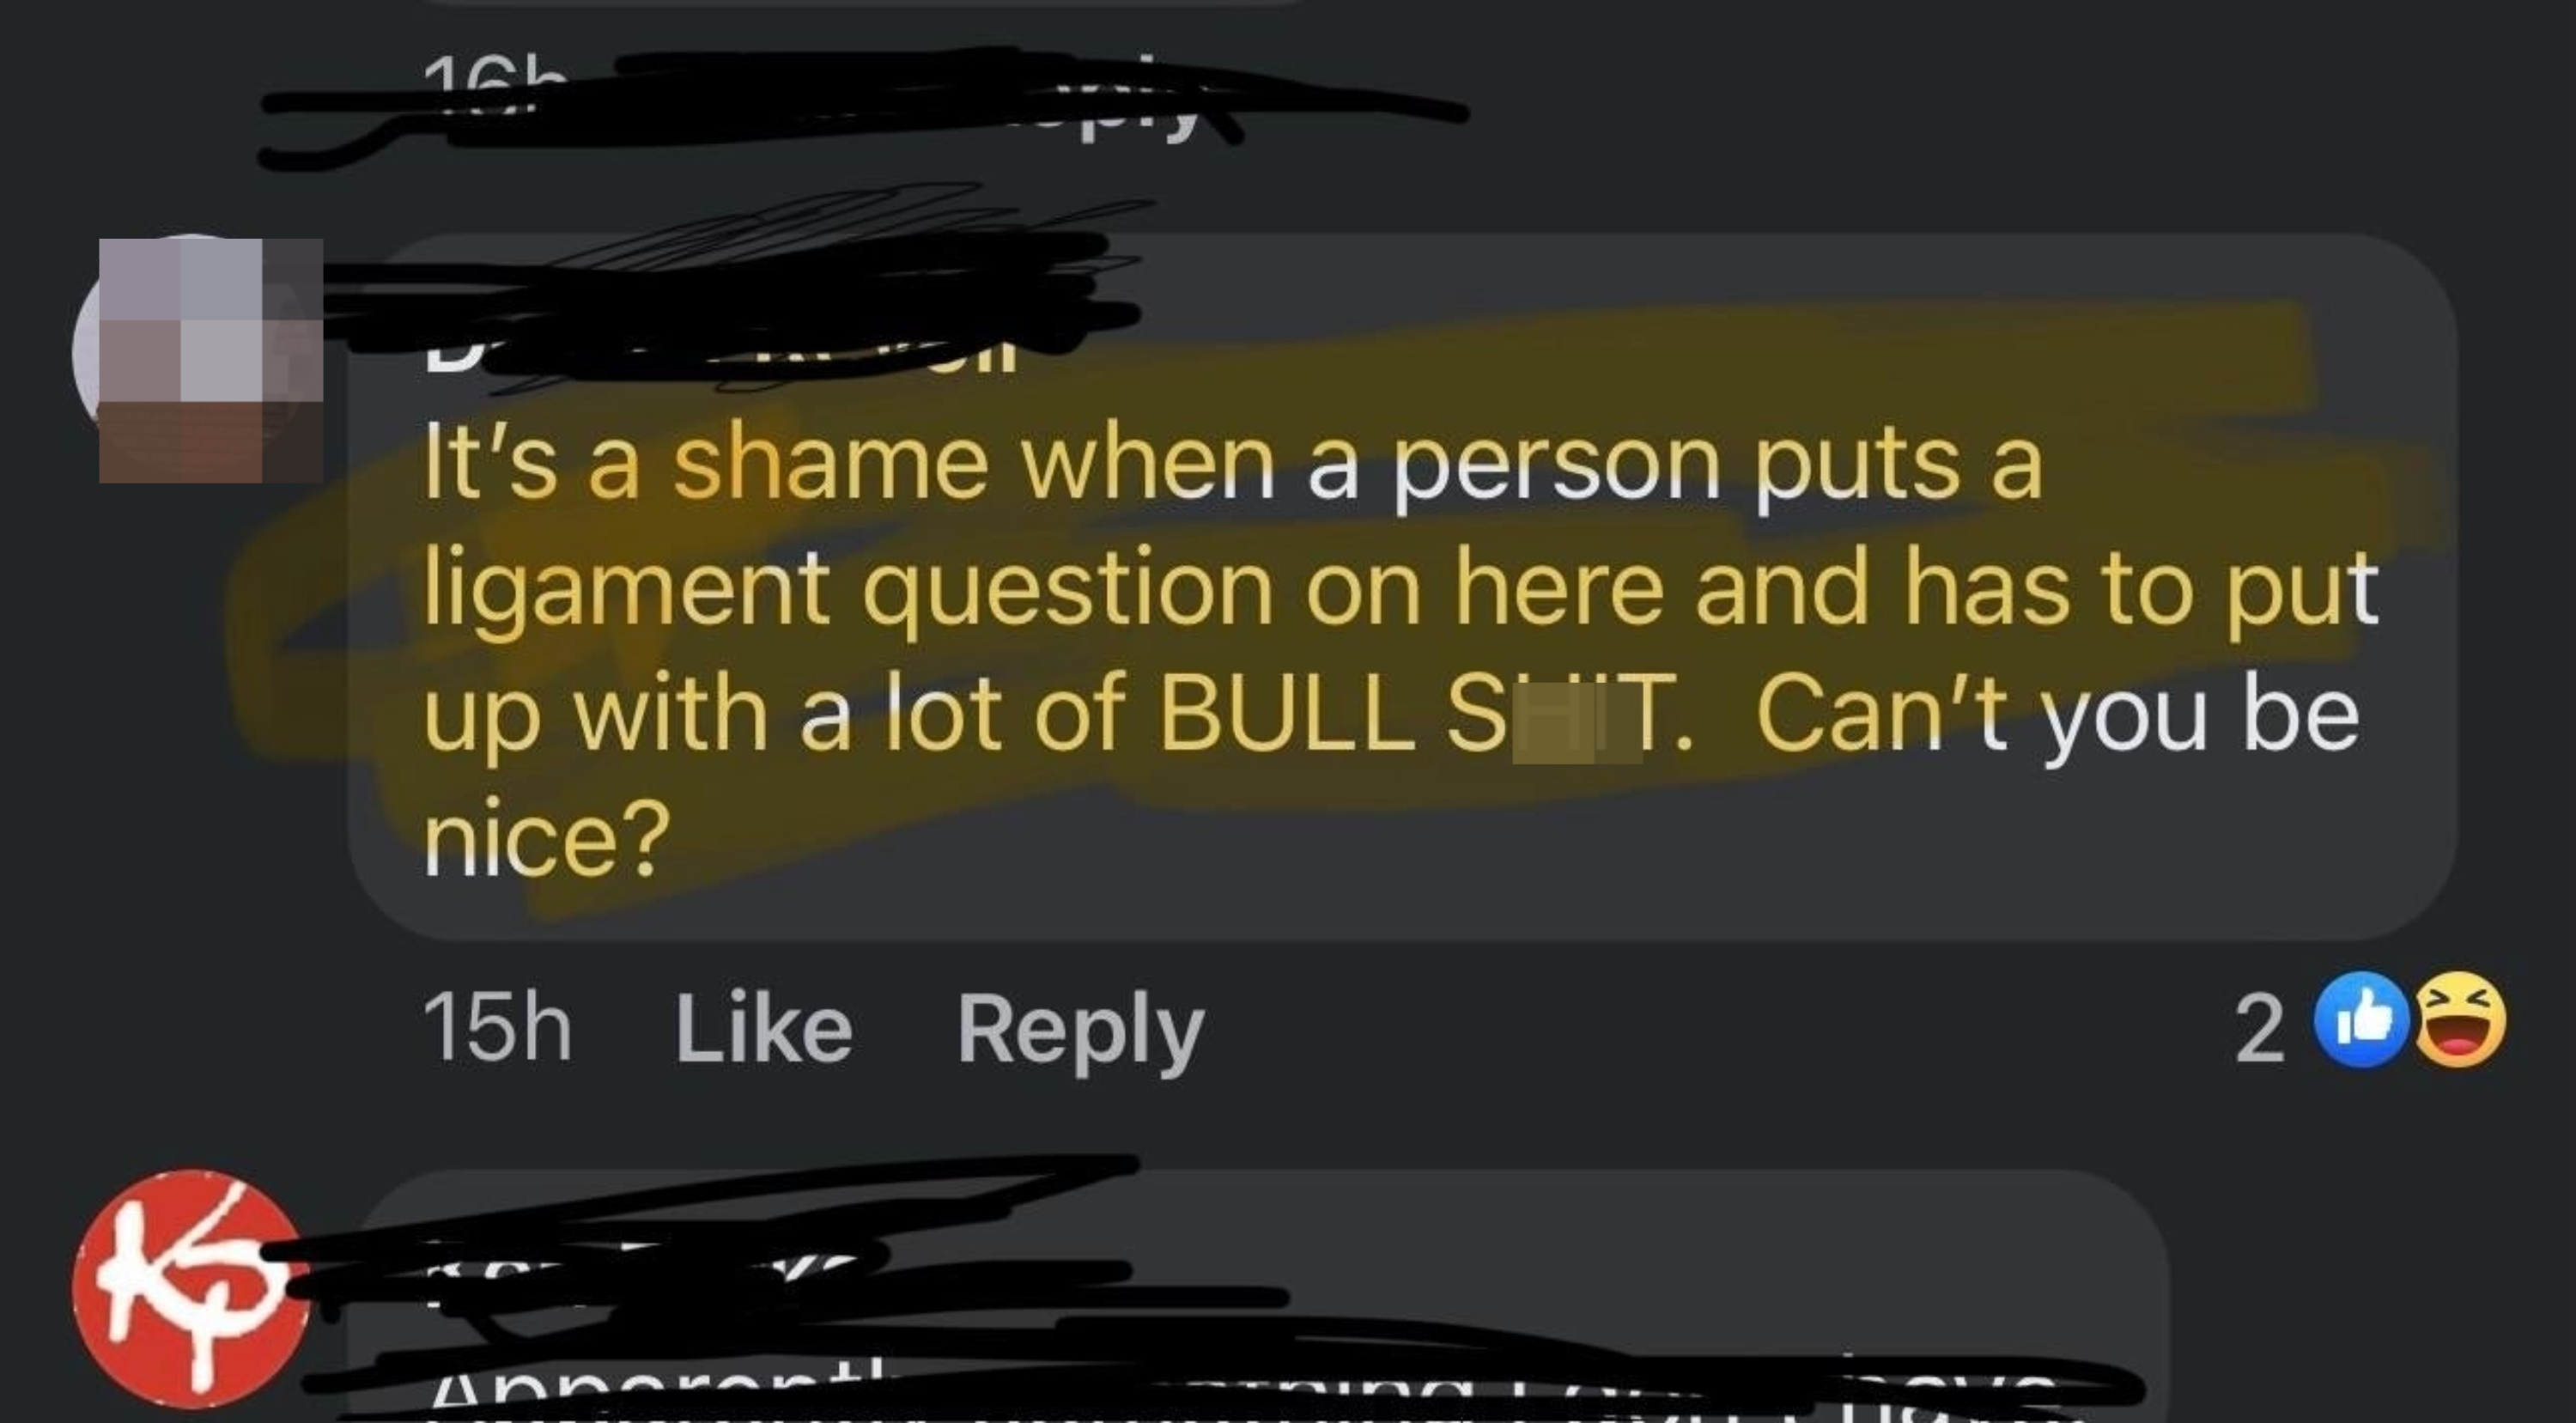 &quot;It&#x27;s a shame when a person puts a ligament question on here and has to put up with a lot of BULL SHIT; can&#x27;t you be nice?